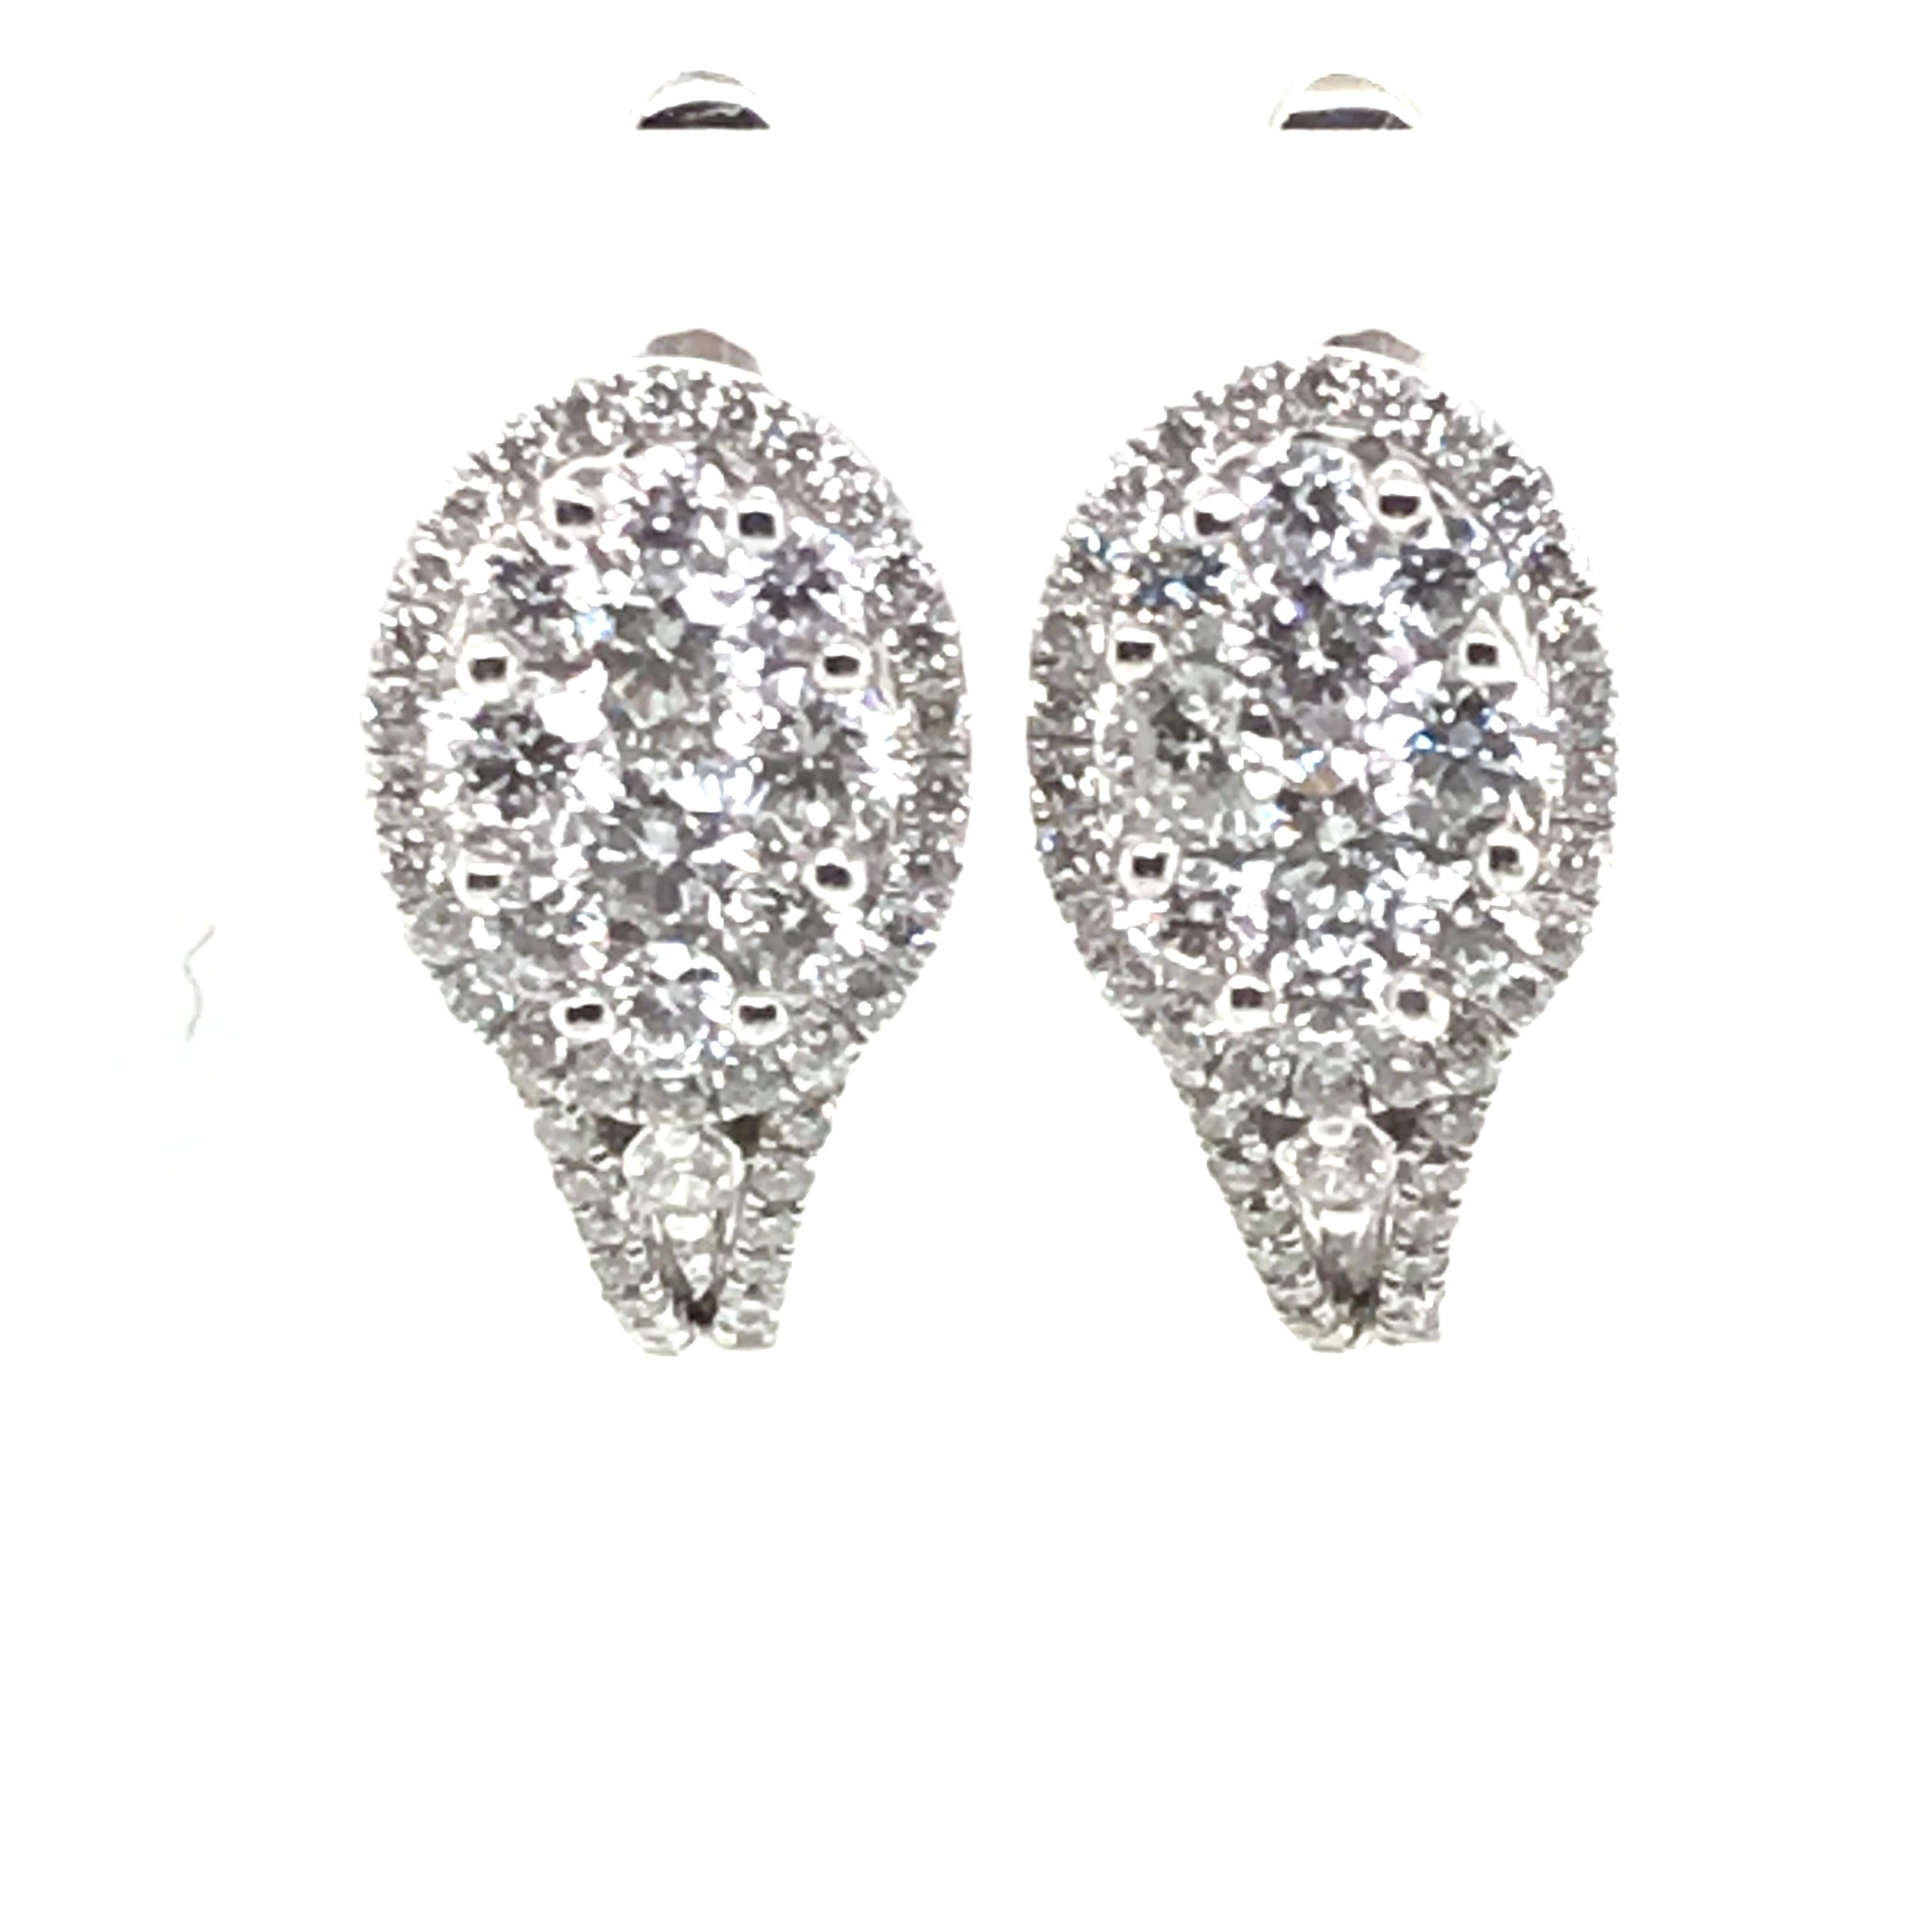 HJN Inc. Ring featuring an Oval Shape Round Diamond Earrings with Round Halos

Round-Cut Diamond Weight: 1.53 Carats

Total Stones: 118
Clarity Grade: SI1
Color Grade: H
Total Diamond Weight: 1.53 Carats
Polish and Symmetry: Very Good
Style Number: